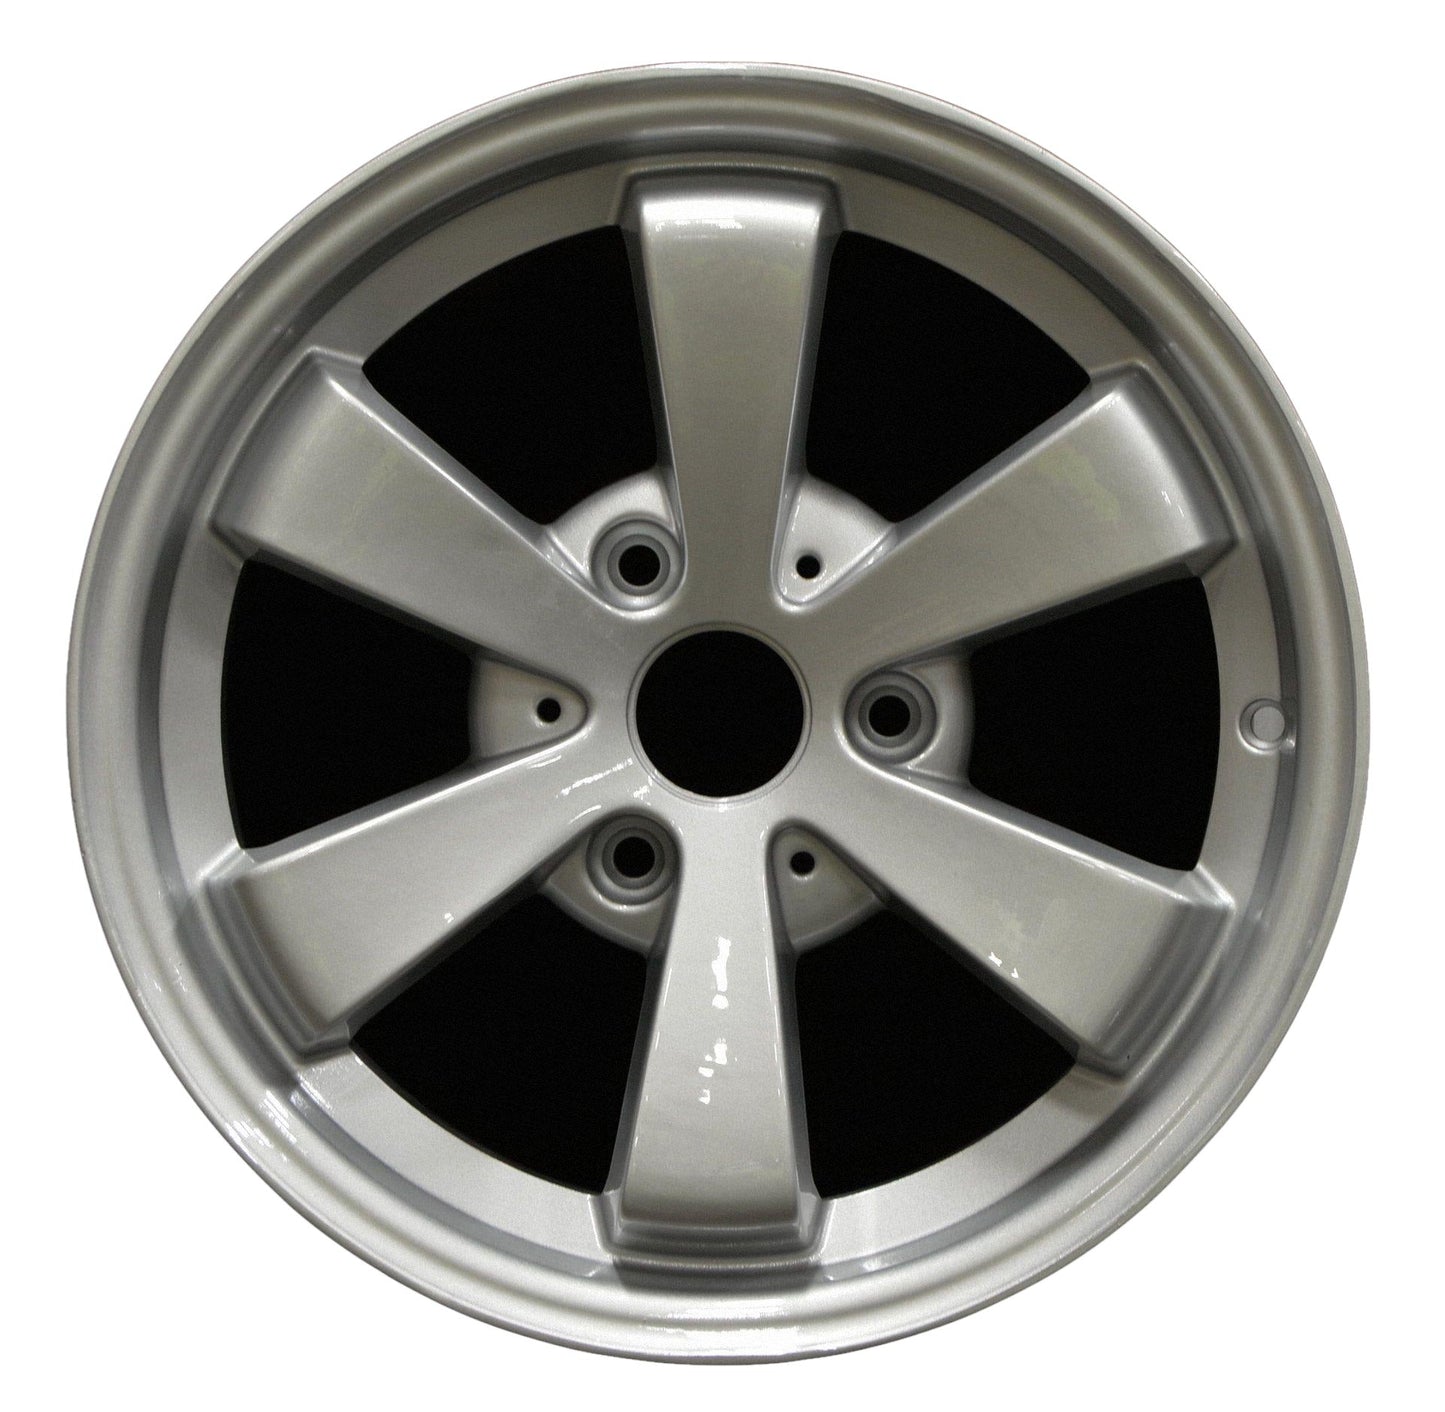 Smart ForTwo  2009, 2010, 2011, 2012, 2013, 2014 Factory OEM Car Wheel Size 15x5.5 Alloy WAO.85189RE.LS01.FF